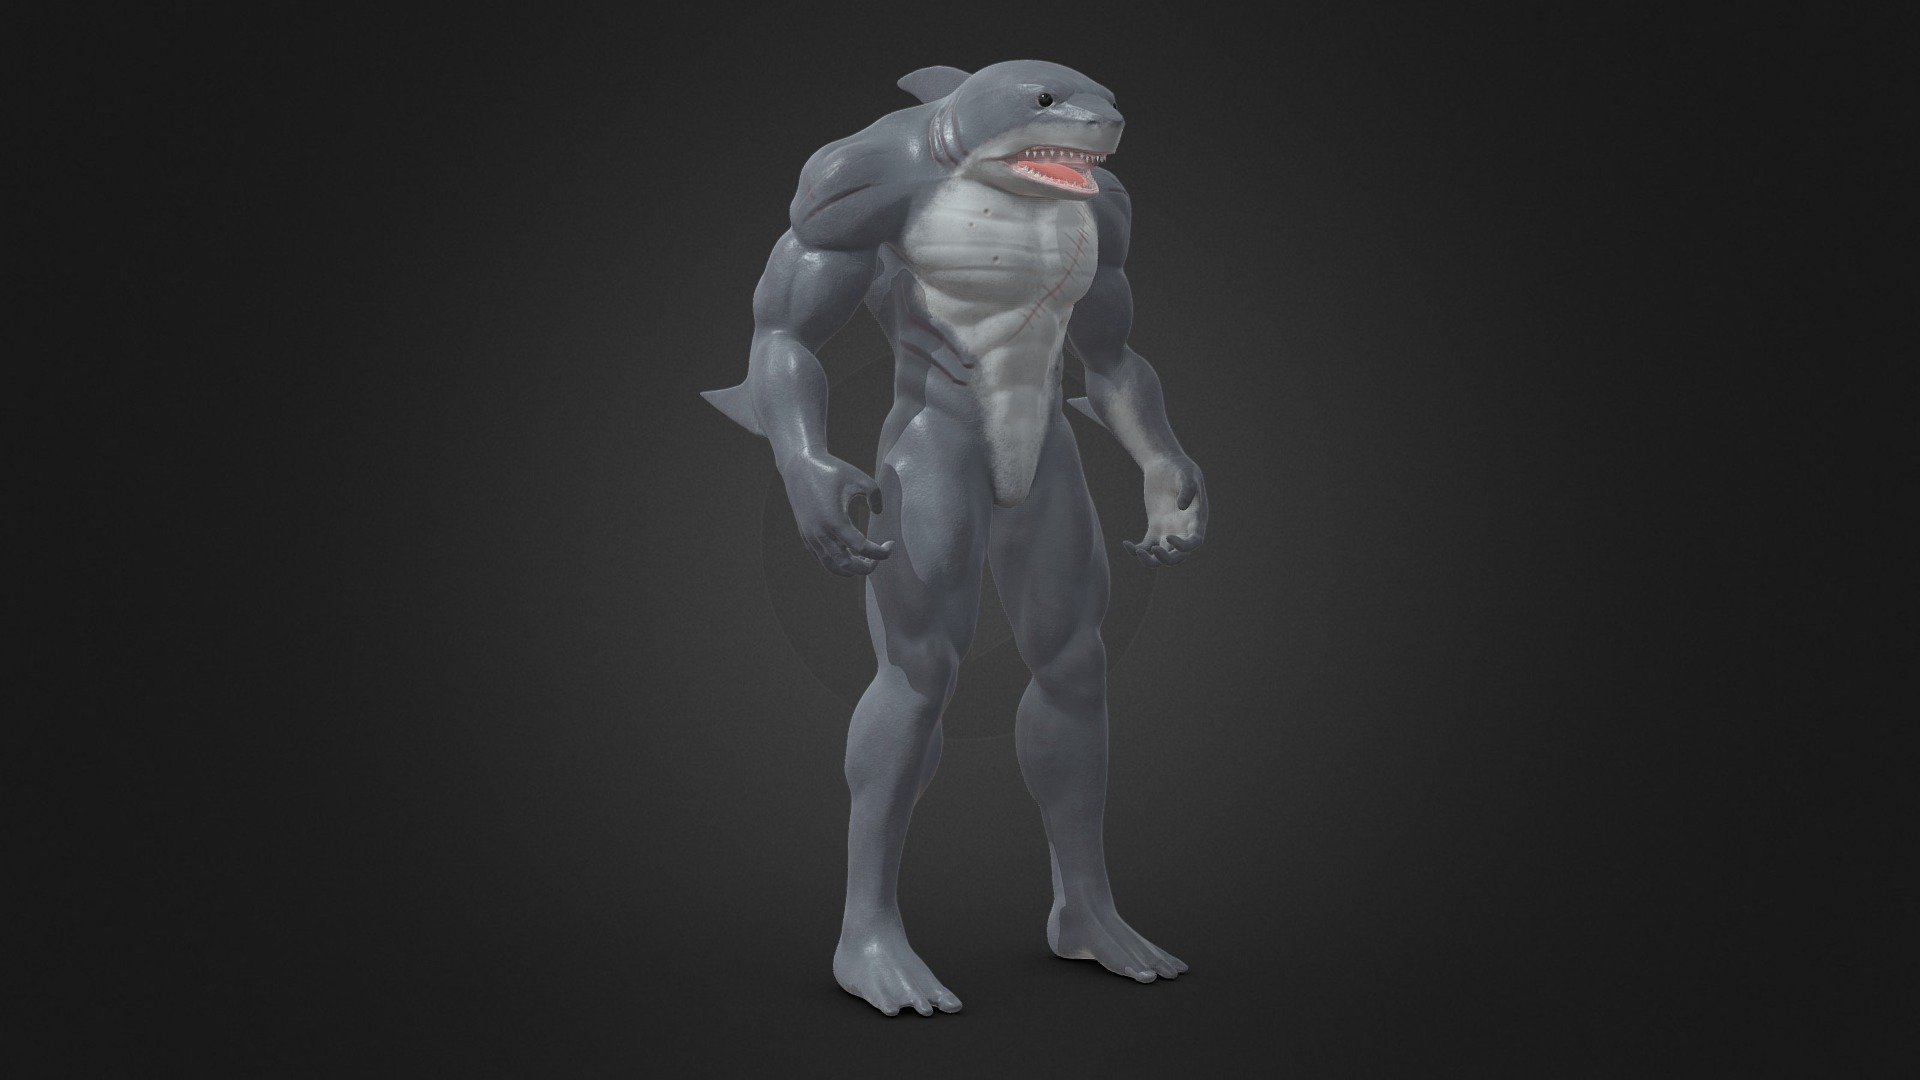 King Shark is a supervillain appearing in comic books published by DC Comics. The character, also known as Nanaue 3d model